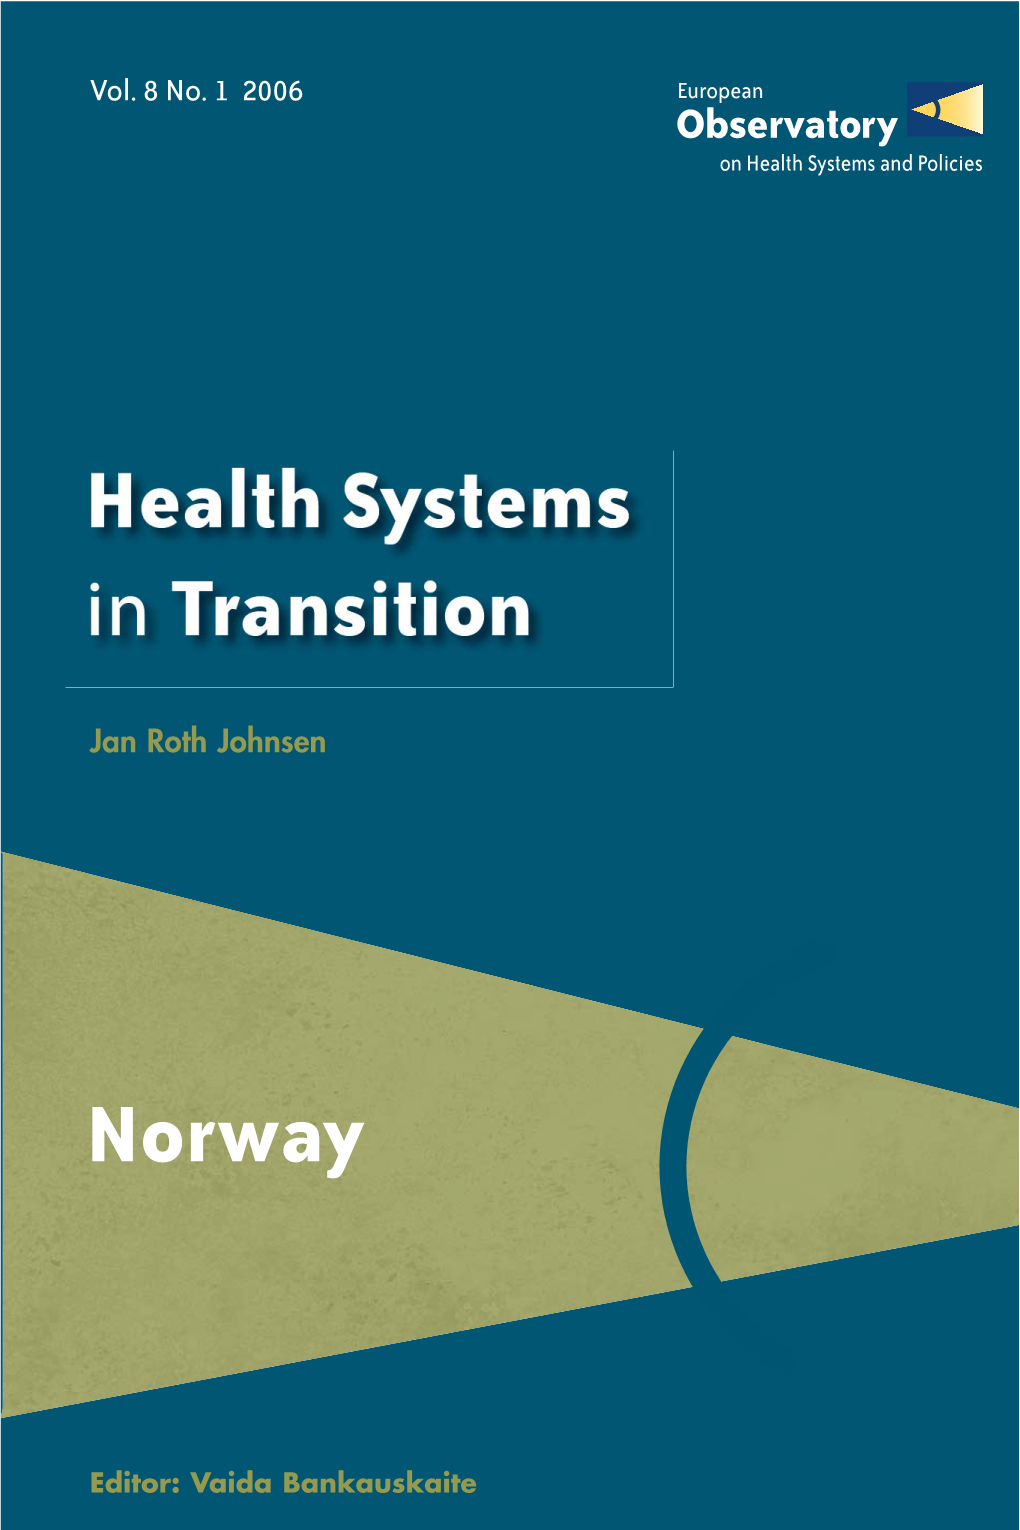 Health Systems in Transition, Norway, 2006